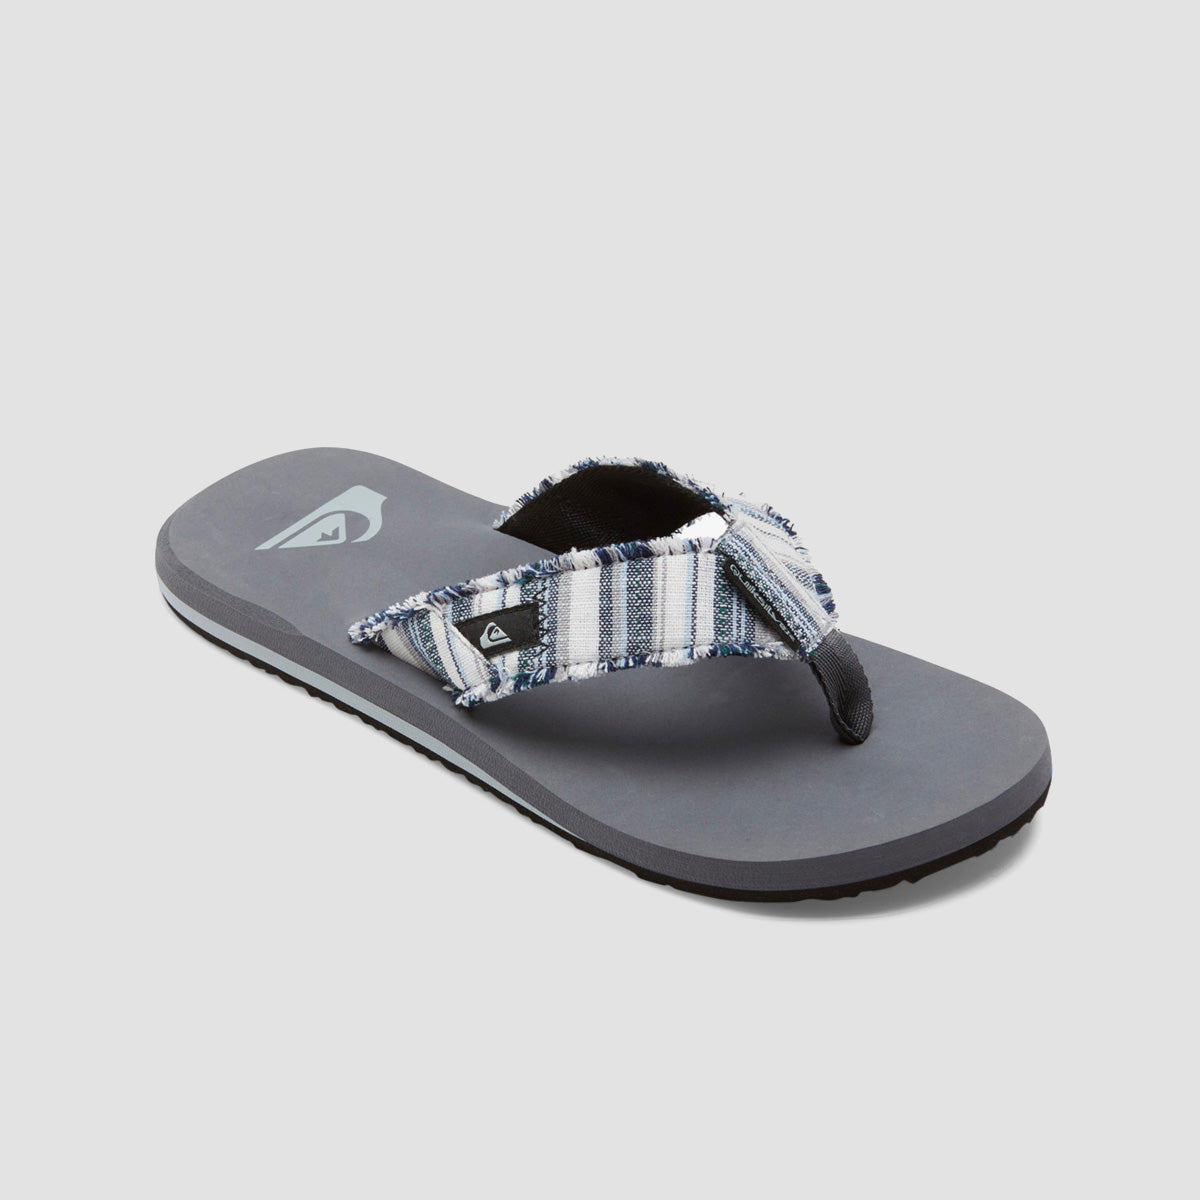 Quiksilver Monkey Abyss Sandals - Grey 5